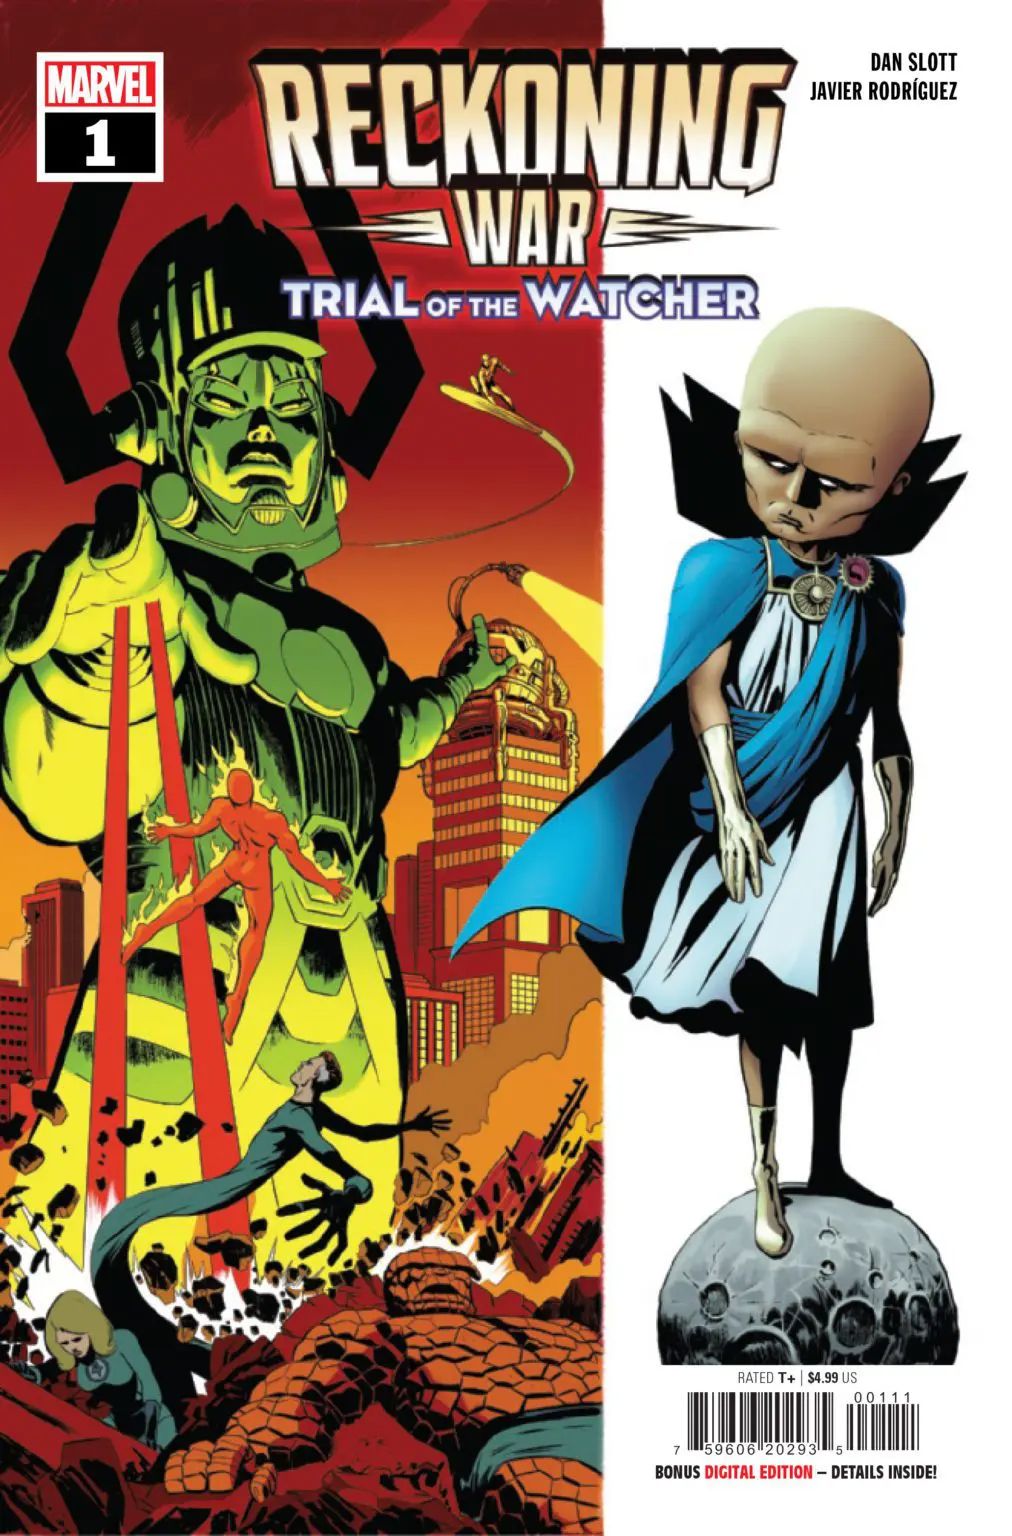  Reckoning War: Trial of the Watcher